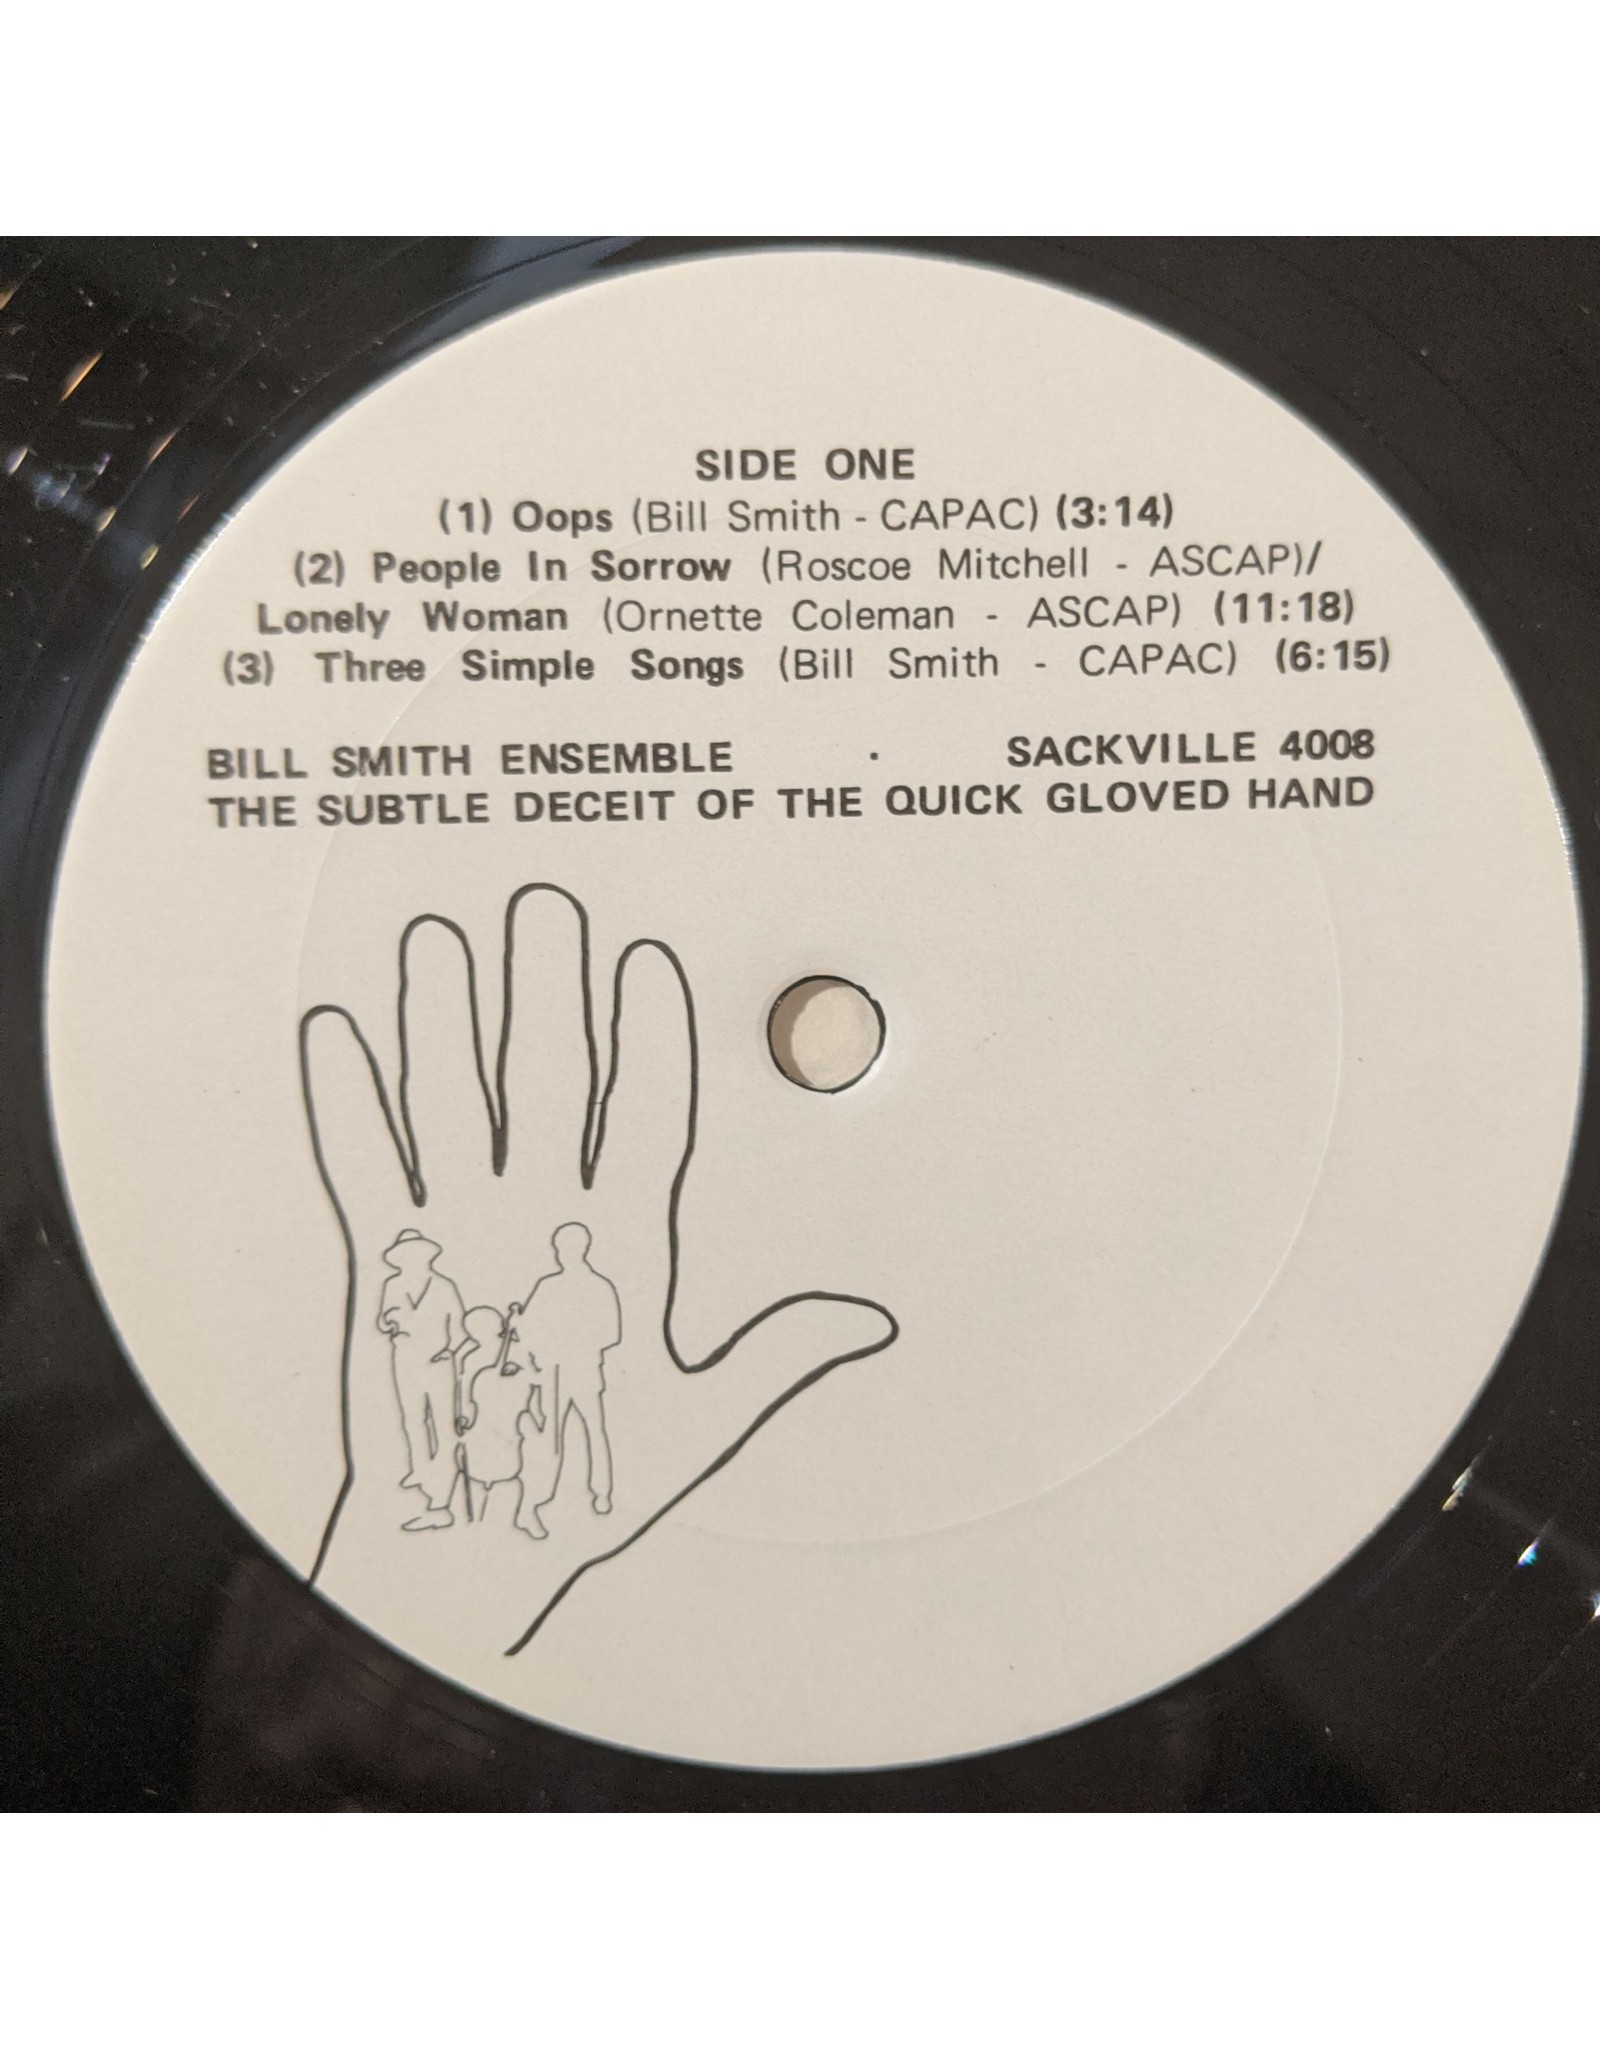 USED: Bill Smith Ensemble: The Subtle Deceit of the Quick Gloved Hand LP